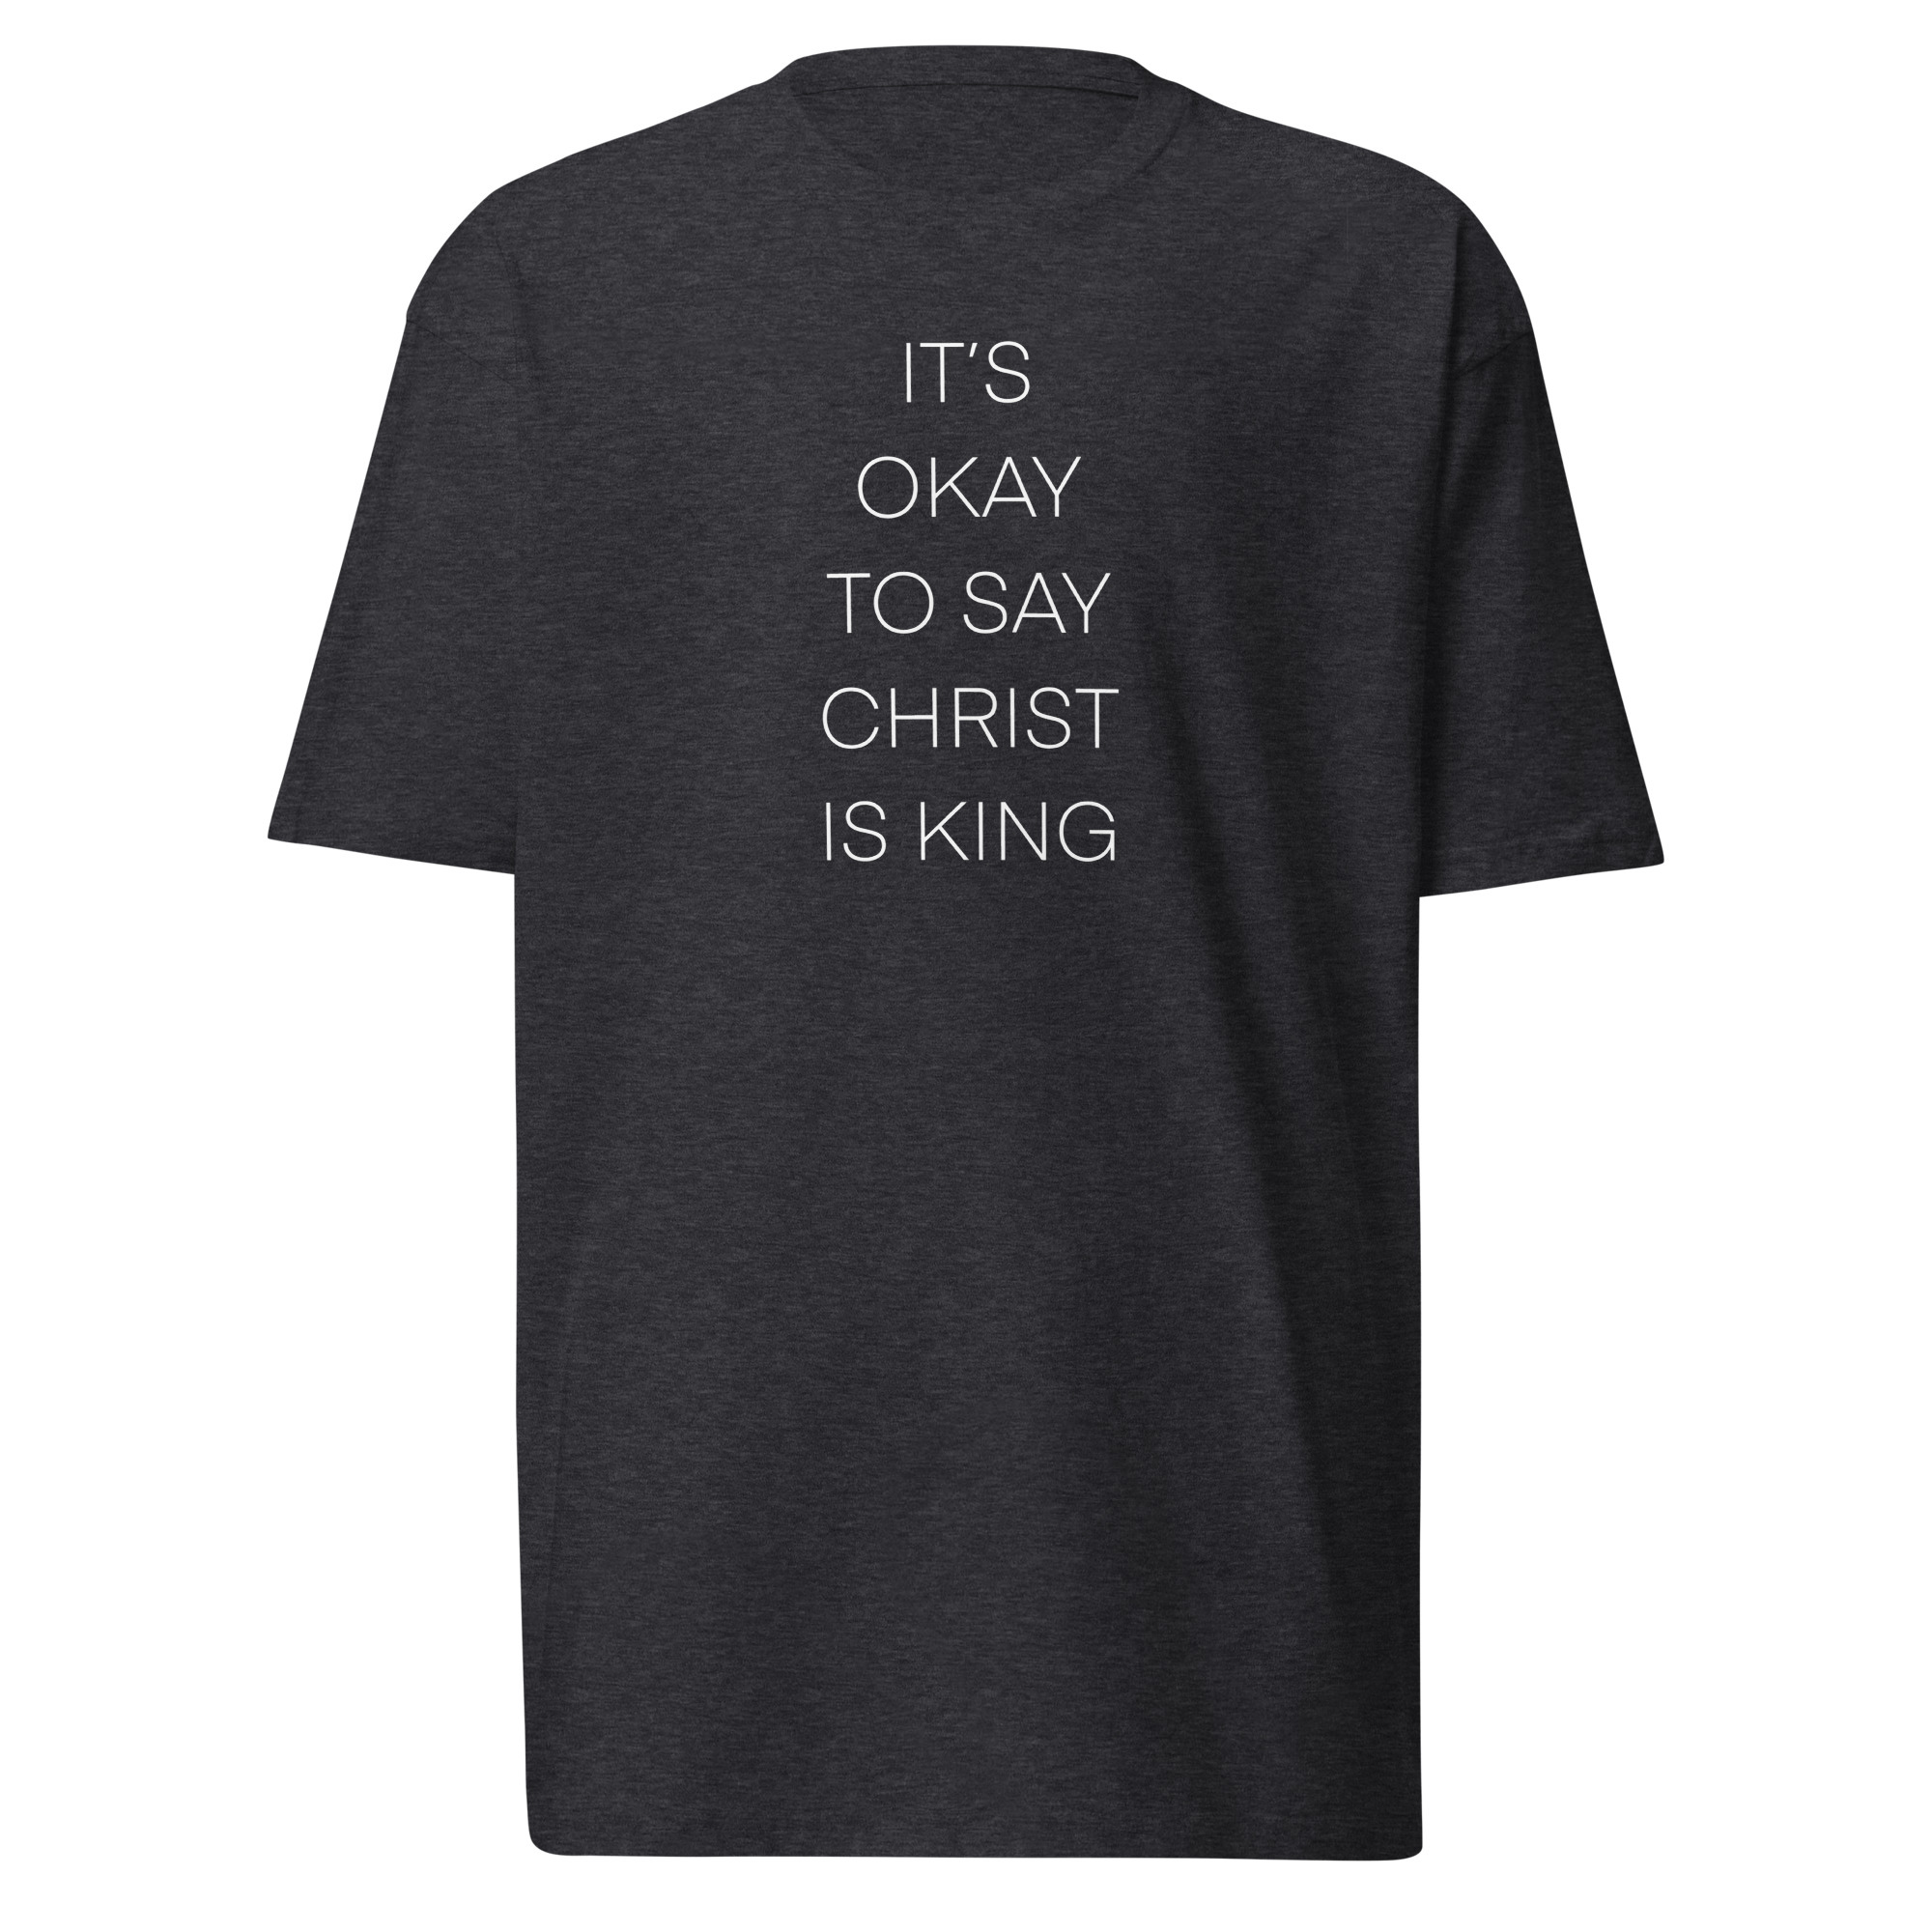 It's Okay To Say Christ Is King T-Shirt - Charcoal Heather / XL